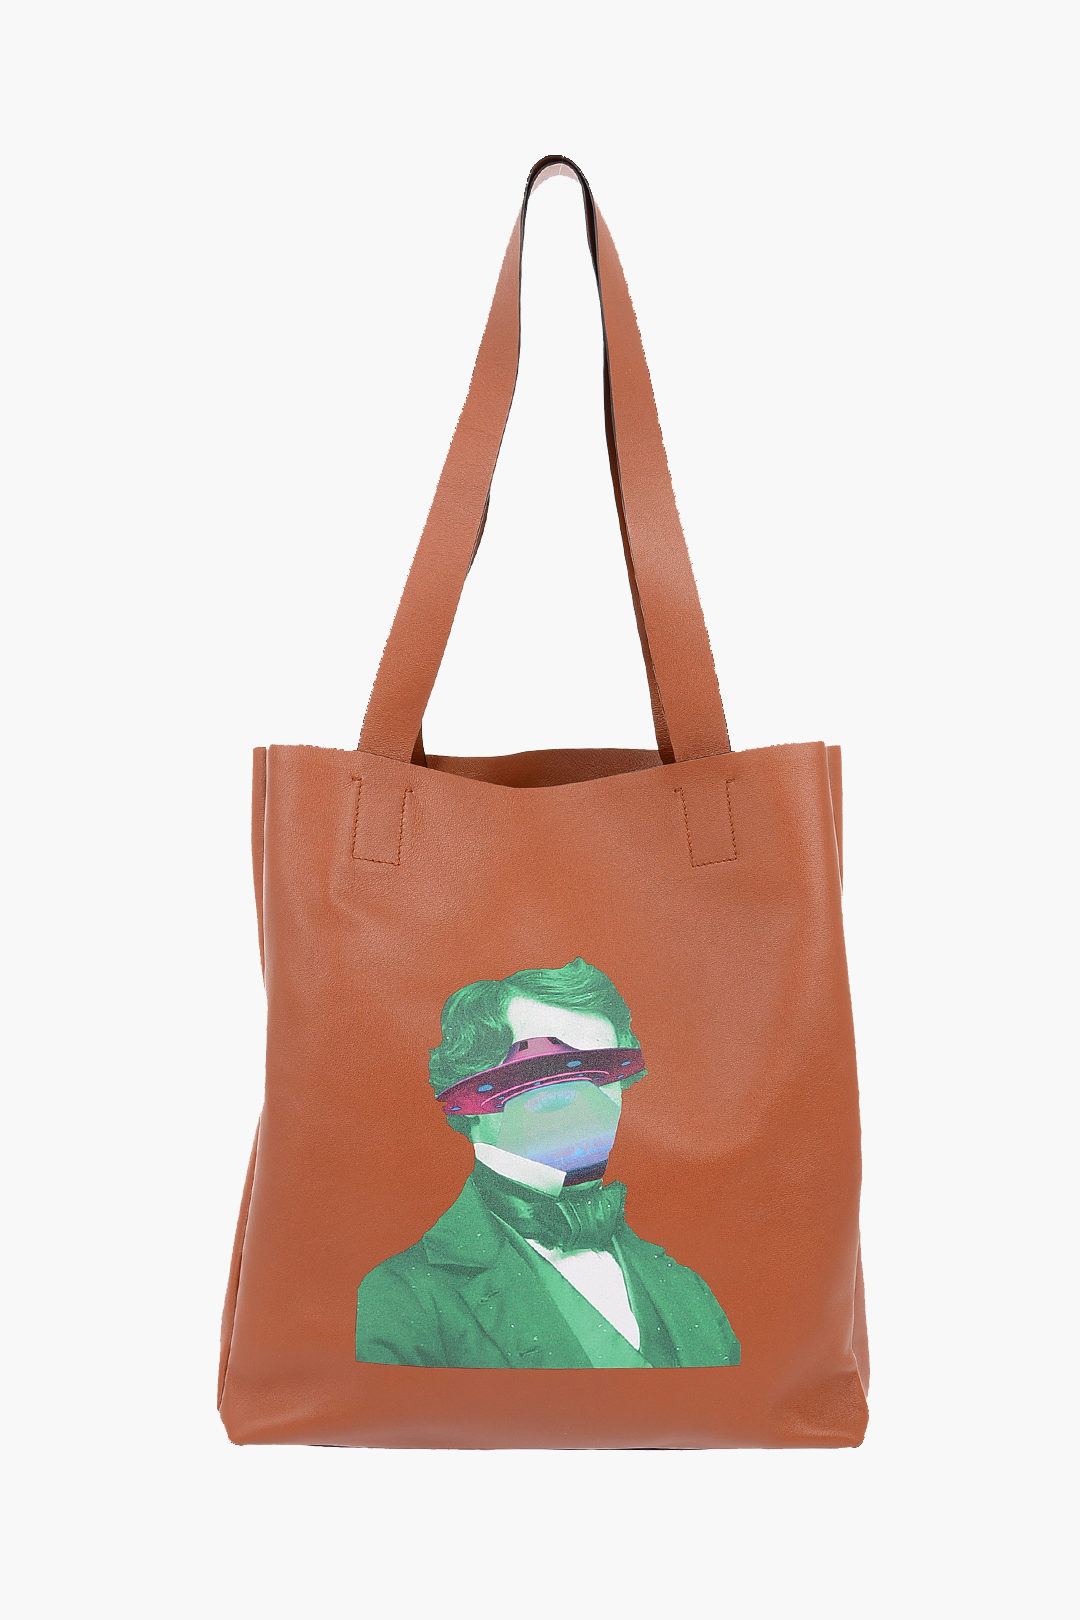 UNDERCOVER JUN TAKAHASHI Soft leather Printed Tote Bag